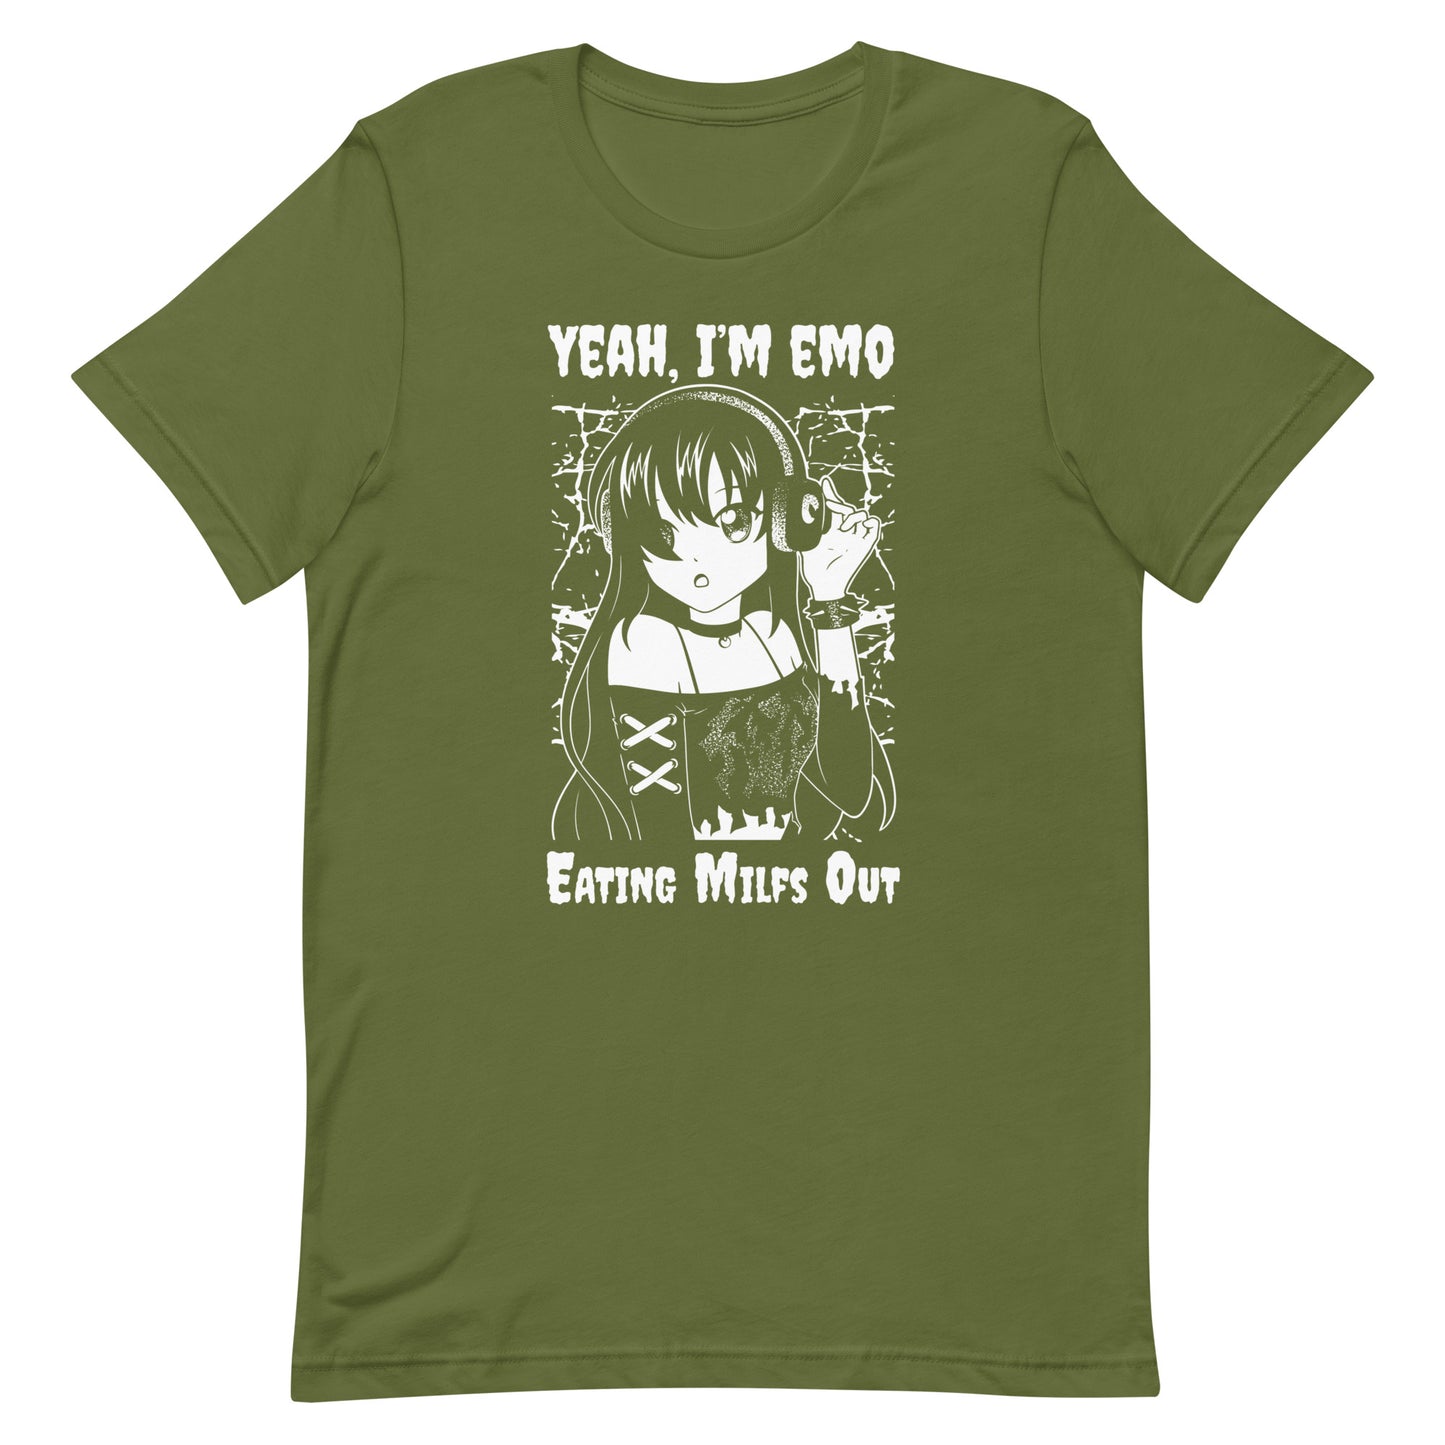 Yeah I'm EMO (Eating Milfs Out) Unisex t-shirt